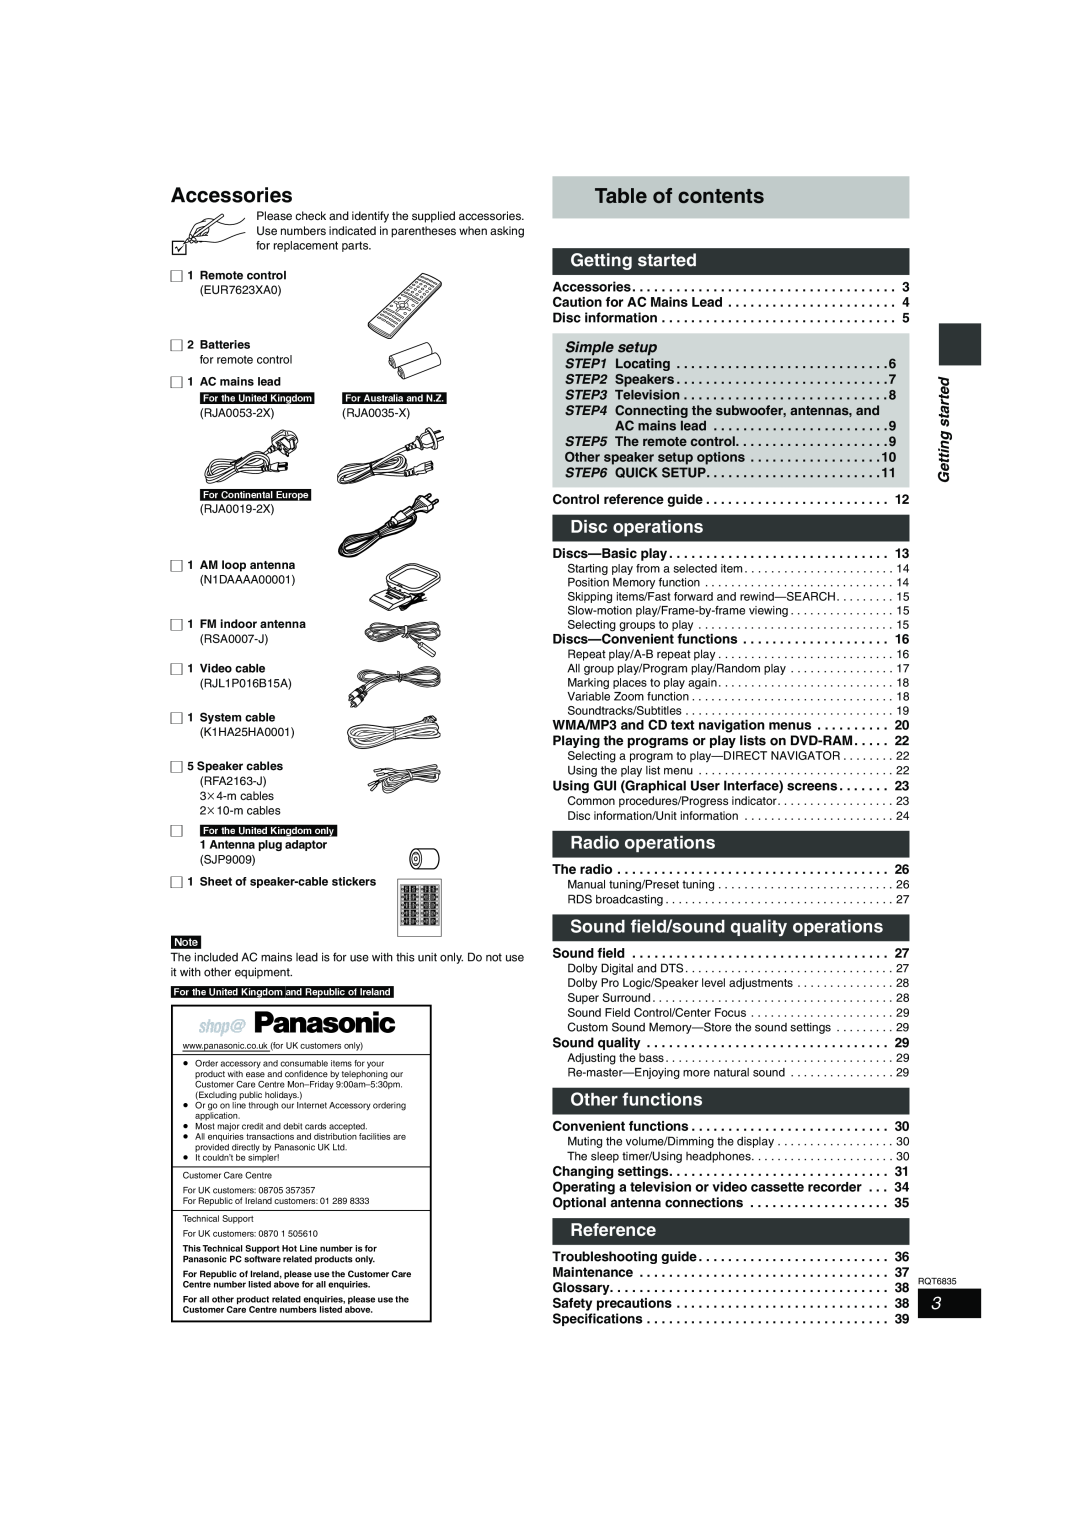 Panasonic SC-HT500 Accessories, Table of contents, Getting started, Disc operations, Radio operations, Other functions 